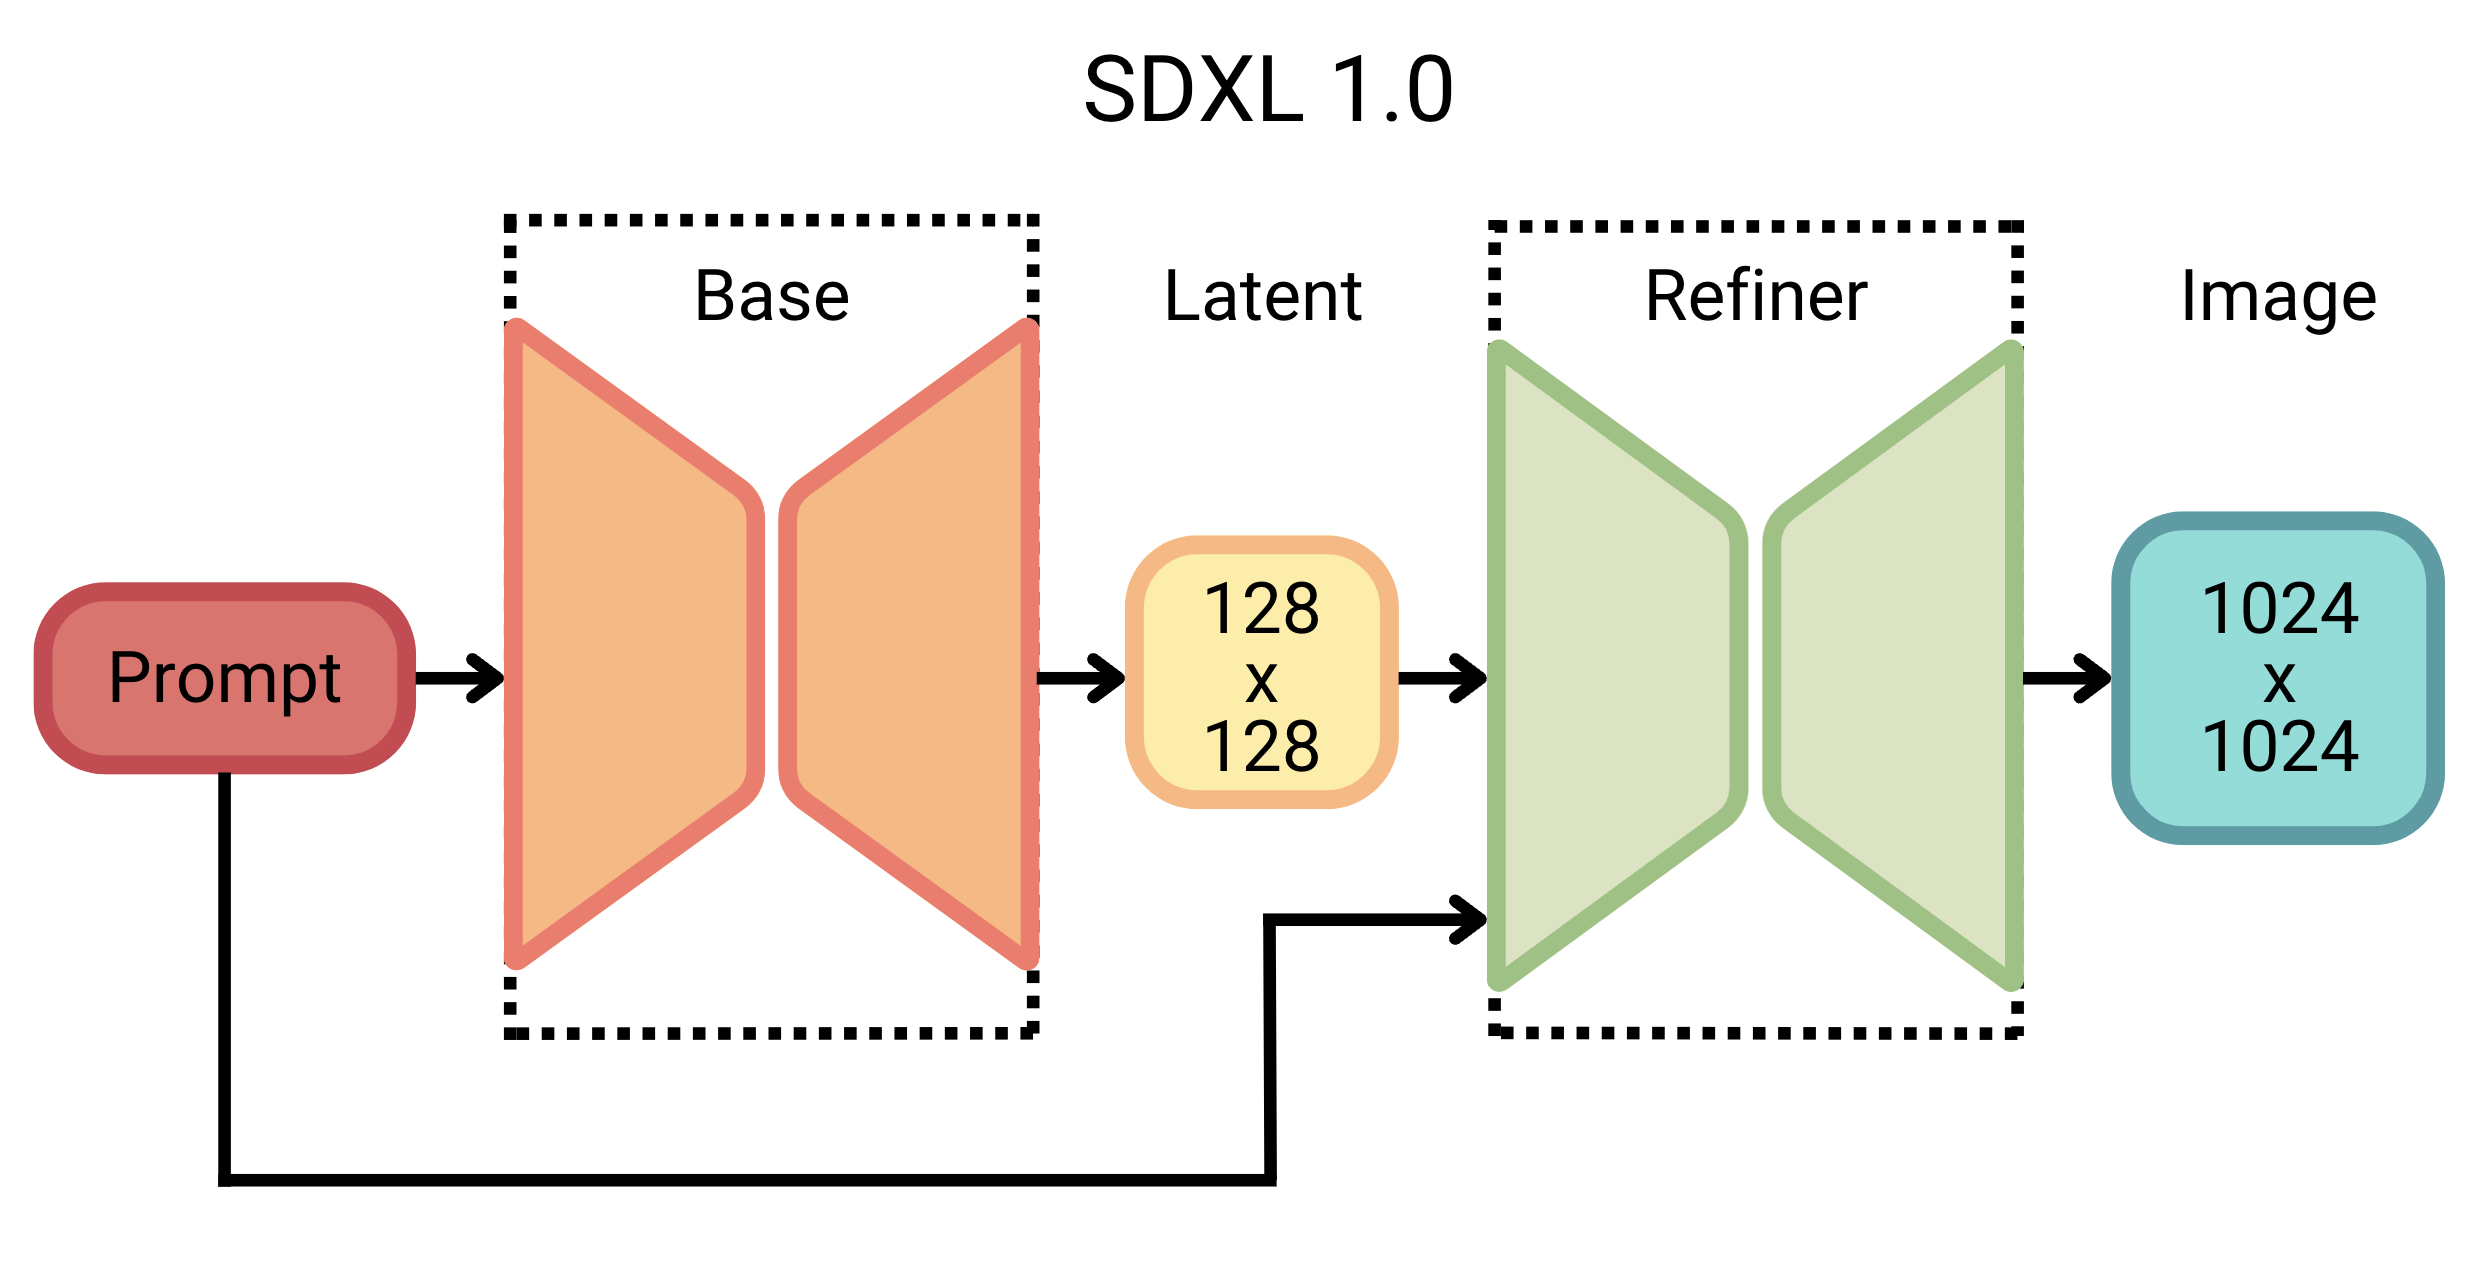 Graphic of the SDXL 1.0 diffusion model architecture, including the base model and refiner model.